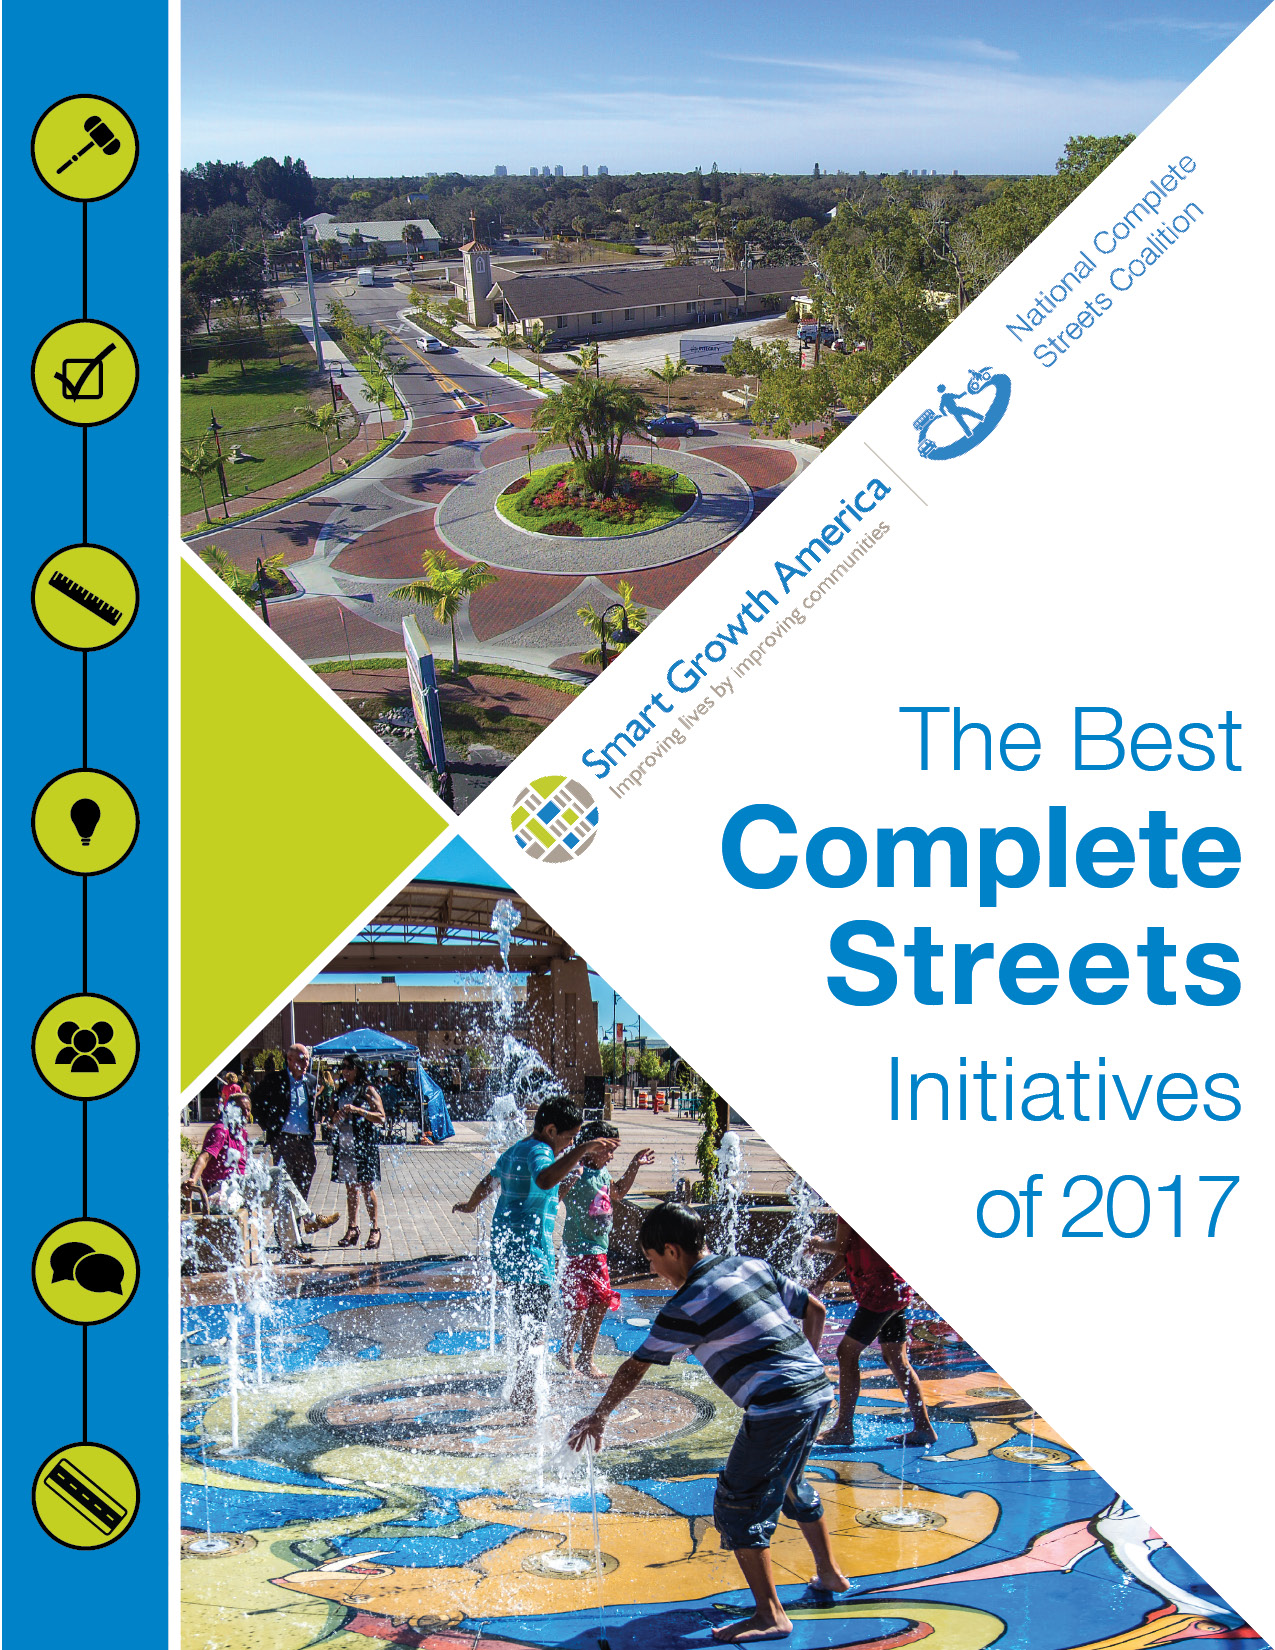 The Best Complete Streets Initiatives of 2017